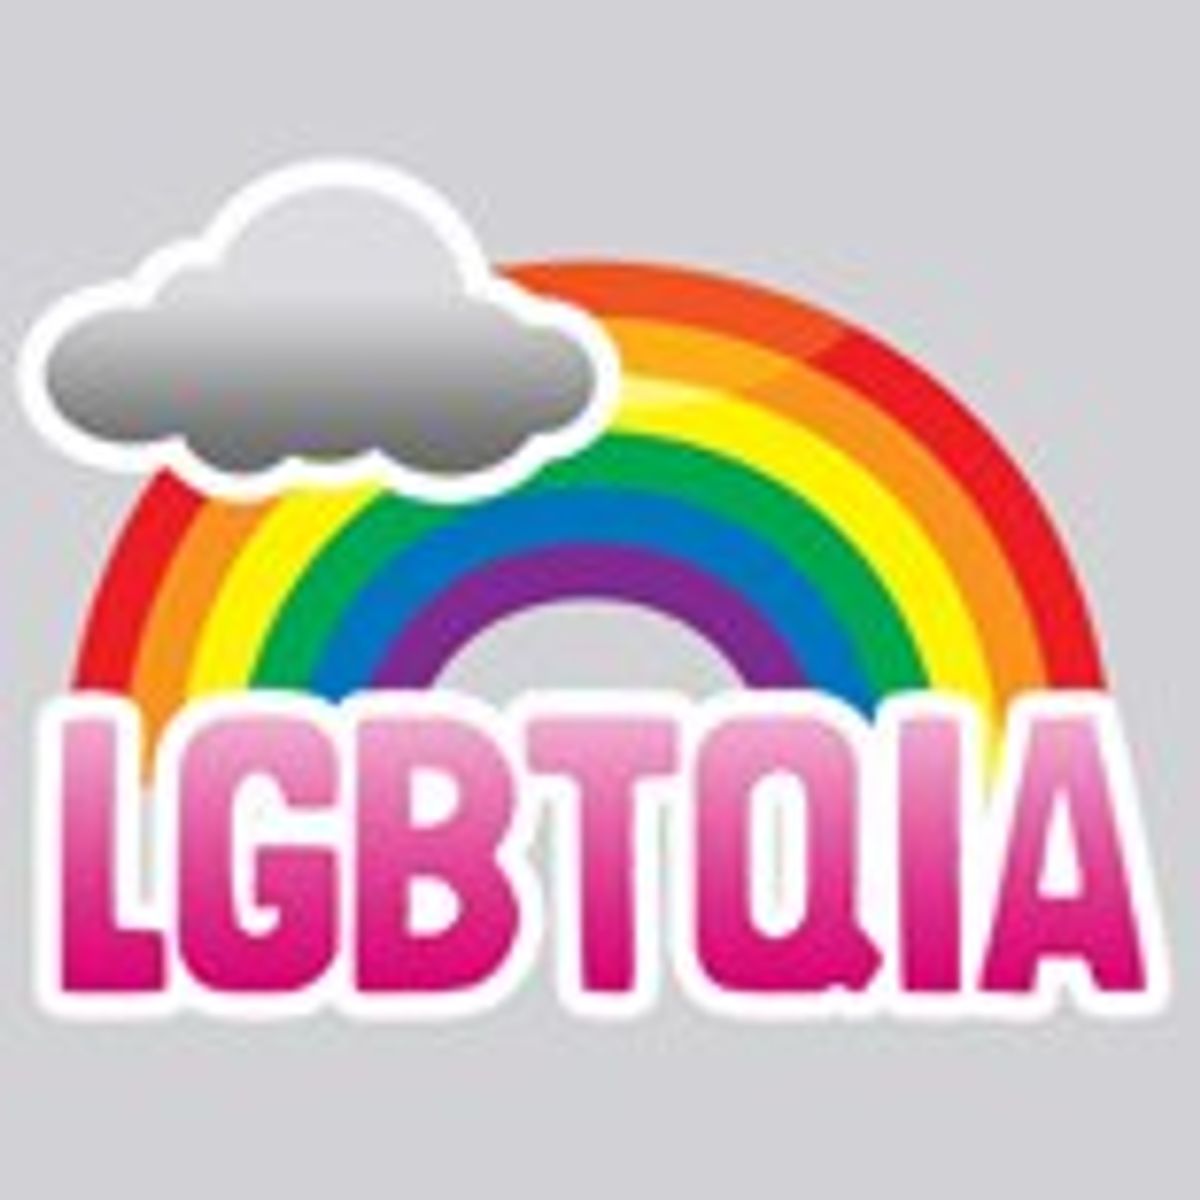 11 Things To Be Aware Of When It Comes To The LGBTQIA Community